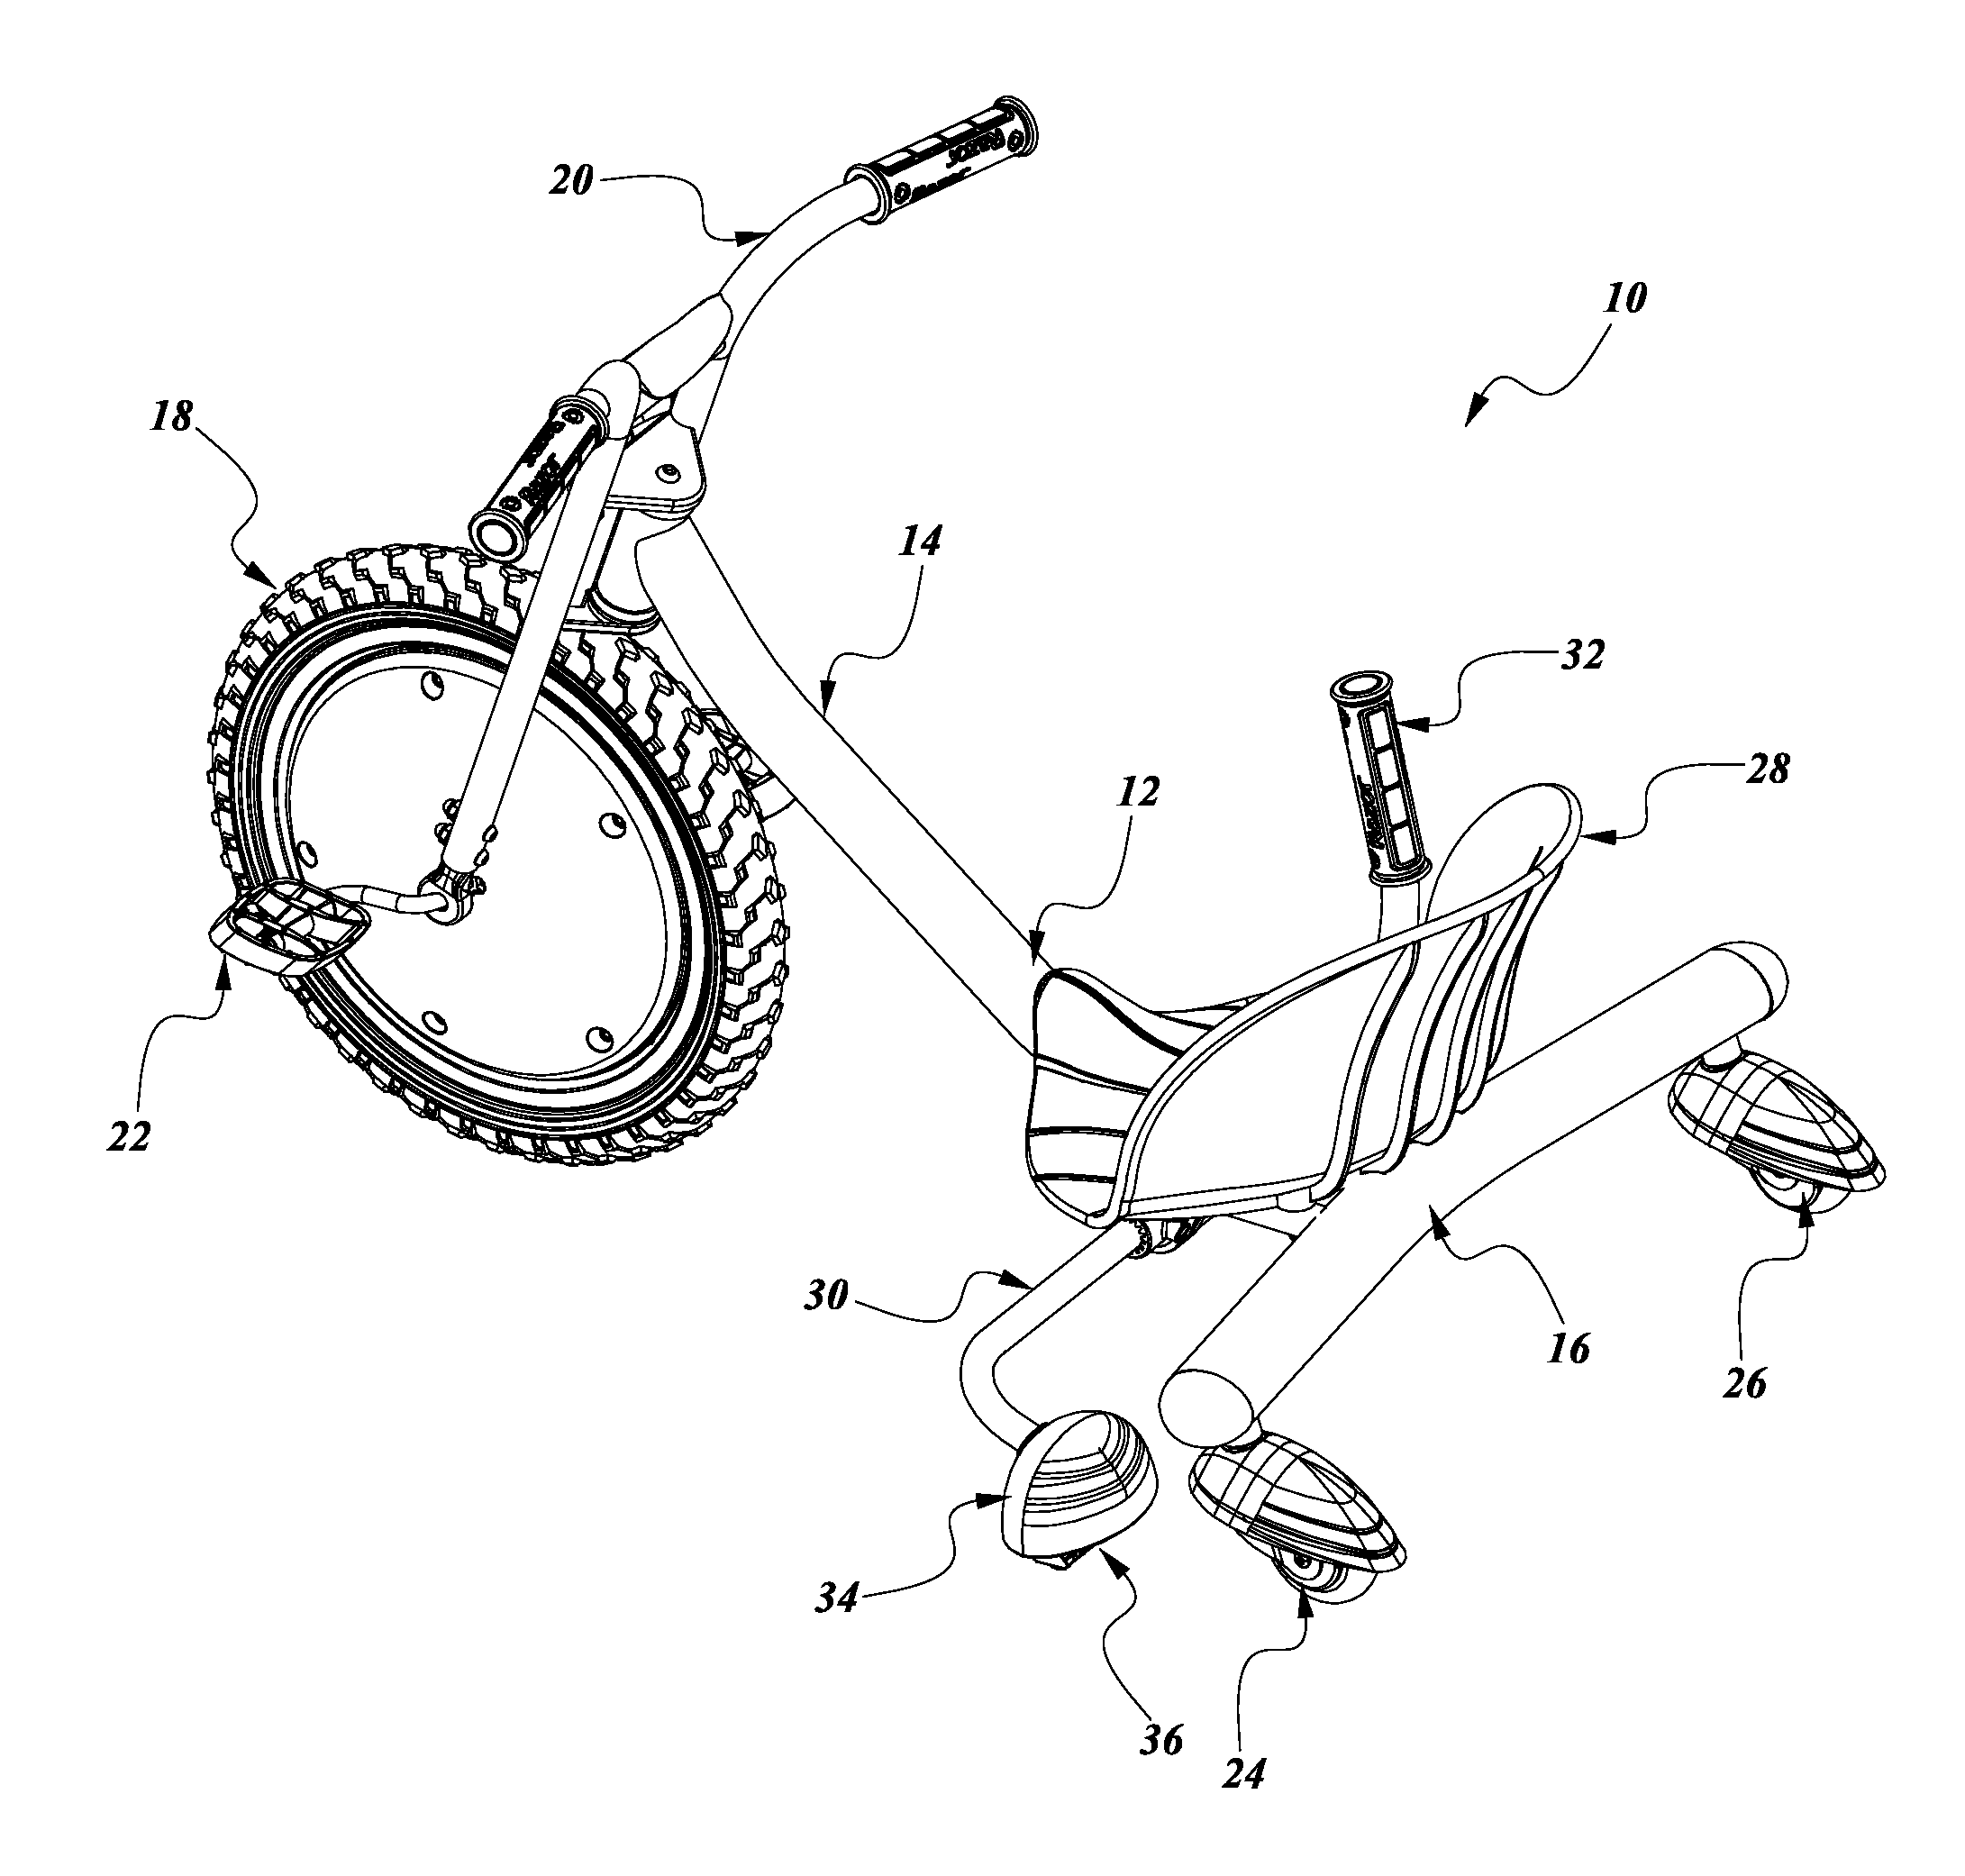 Sparking device for a personal mobility vehicle